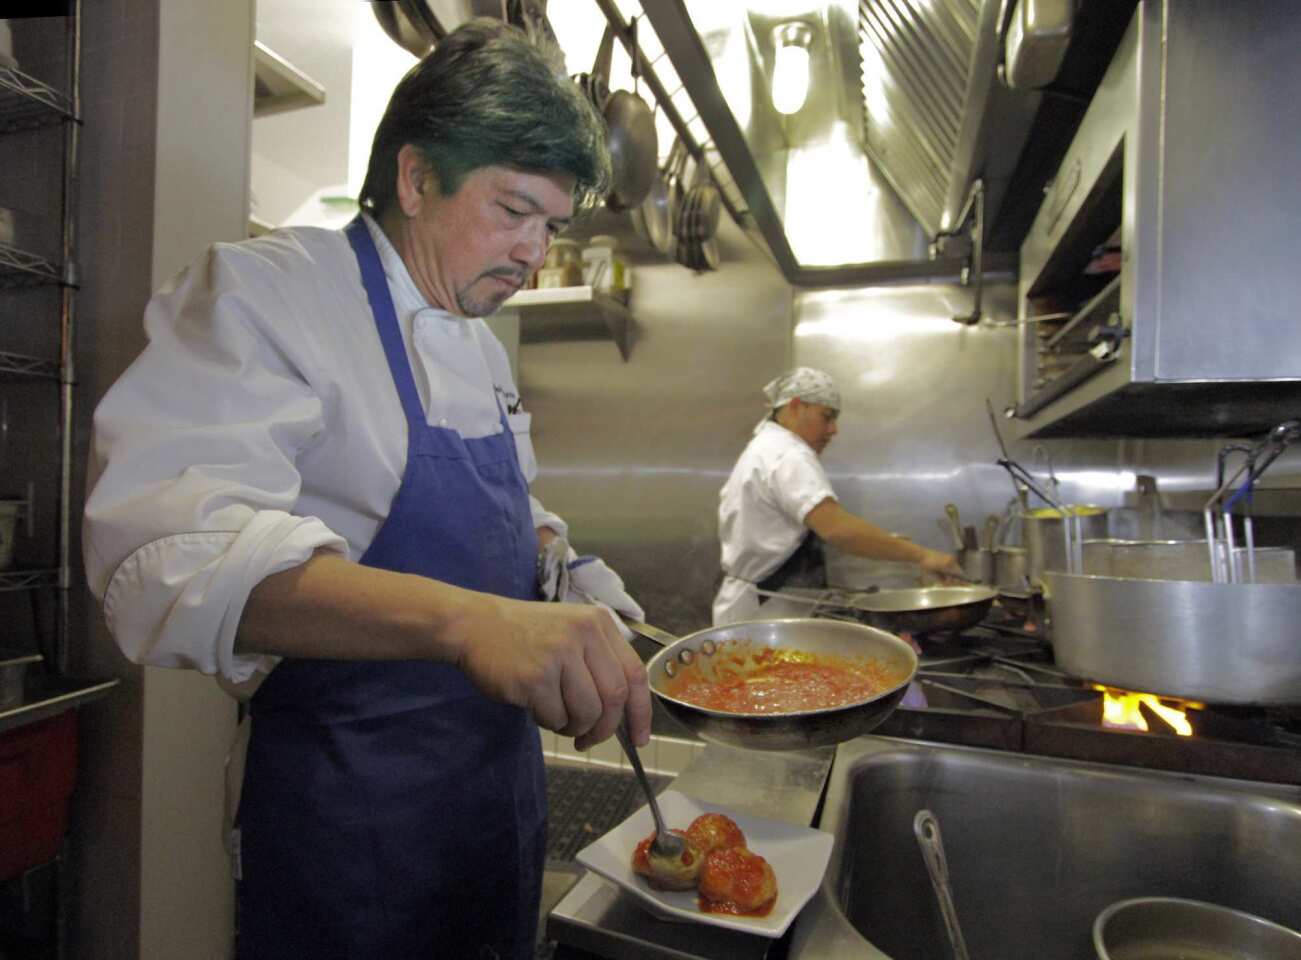 Chef and owner Andre Guerrero in the kitchen of his new Highland Park restaurant, which specializes in Italian-American food.